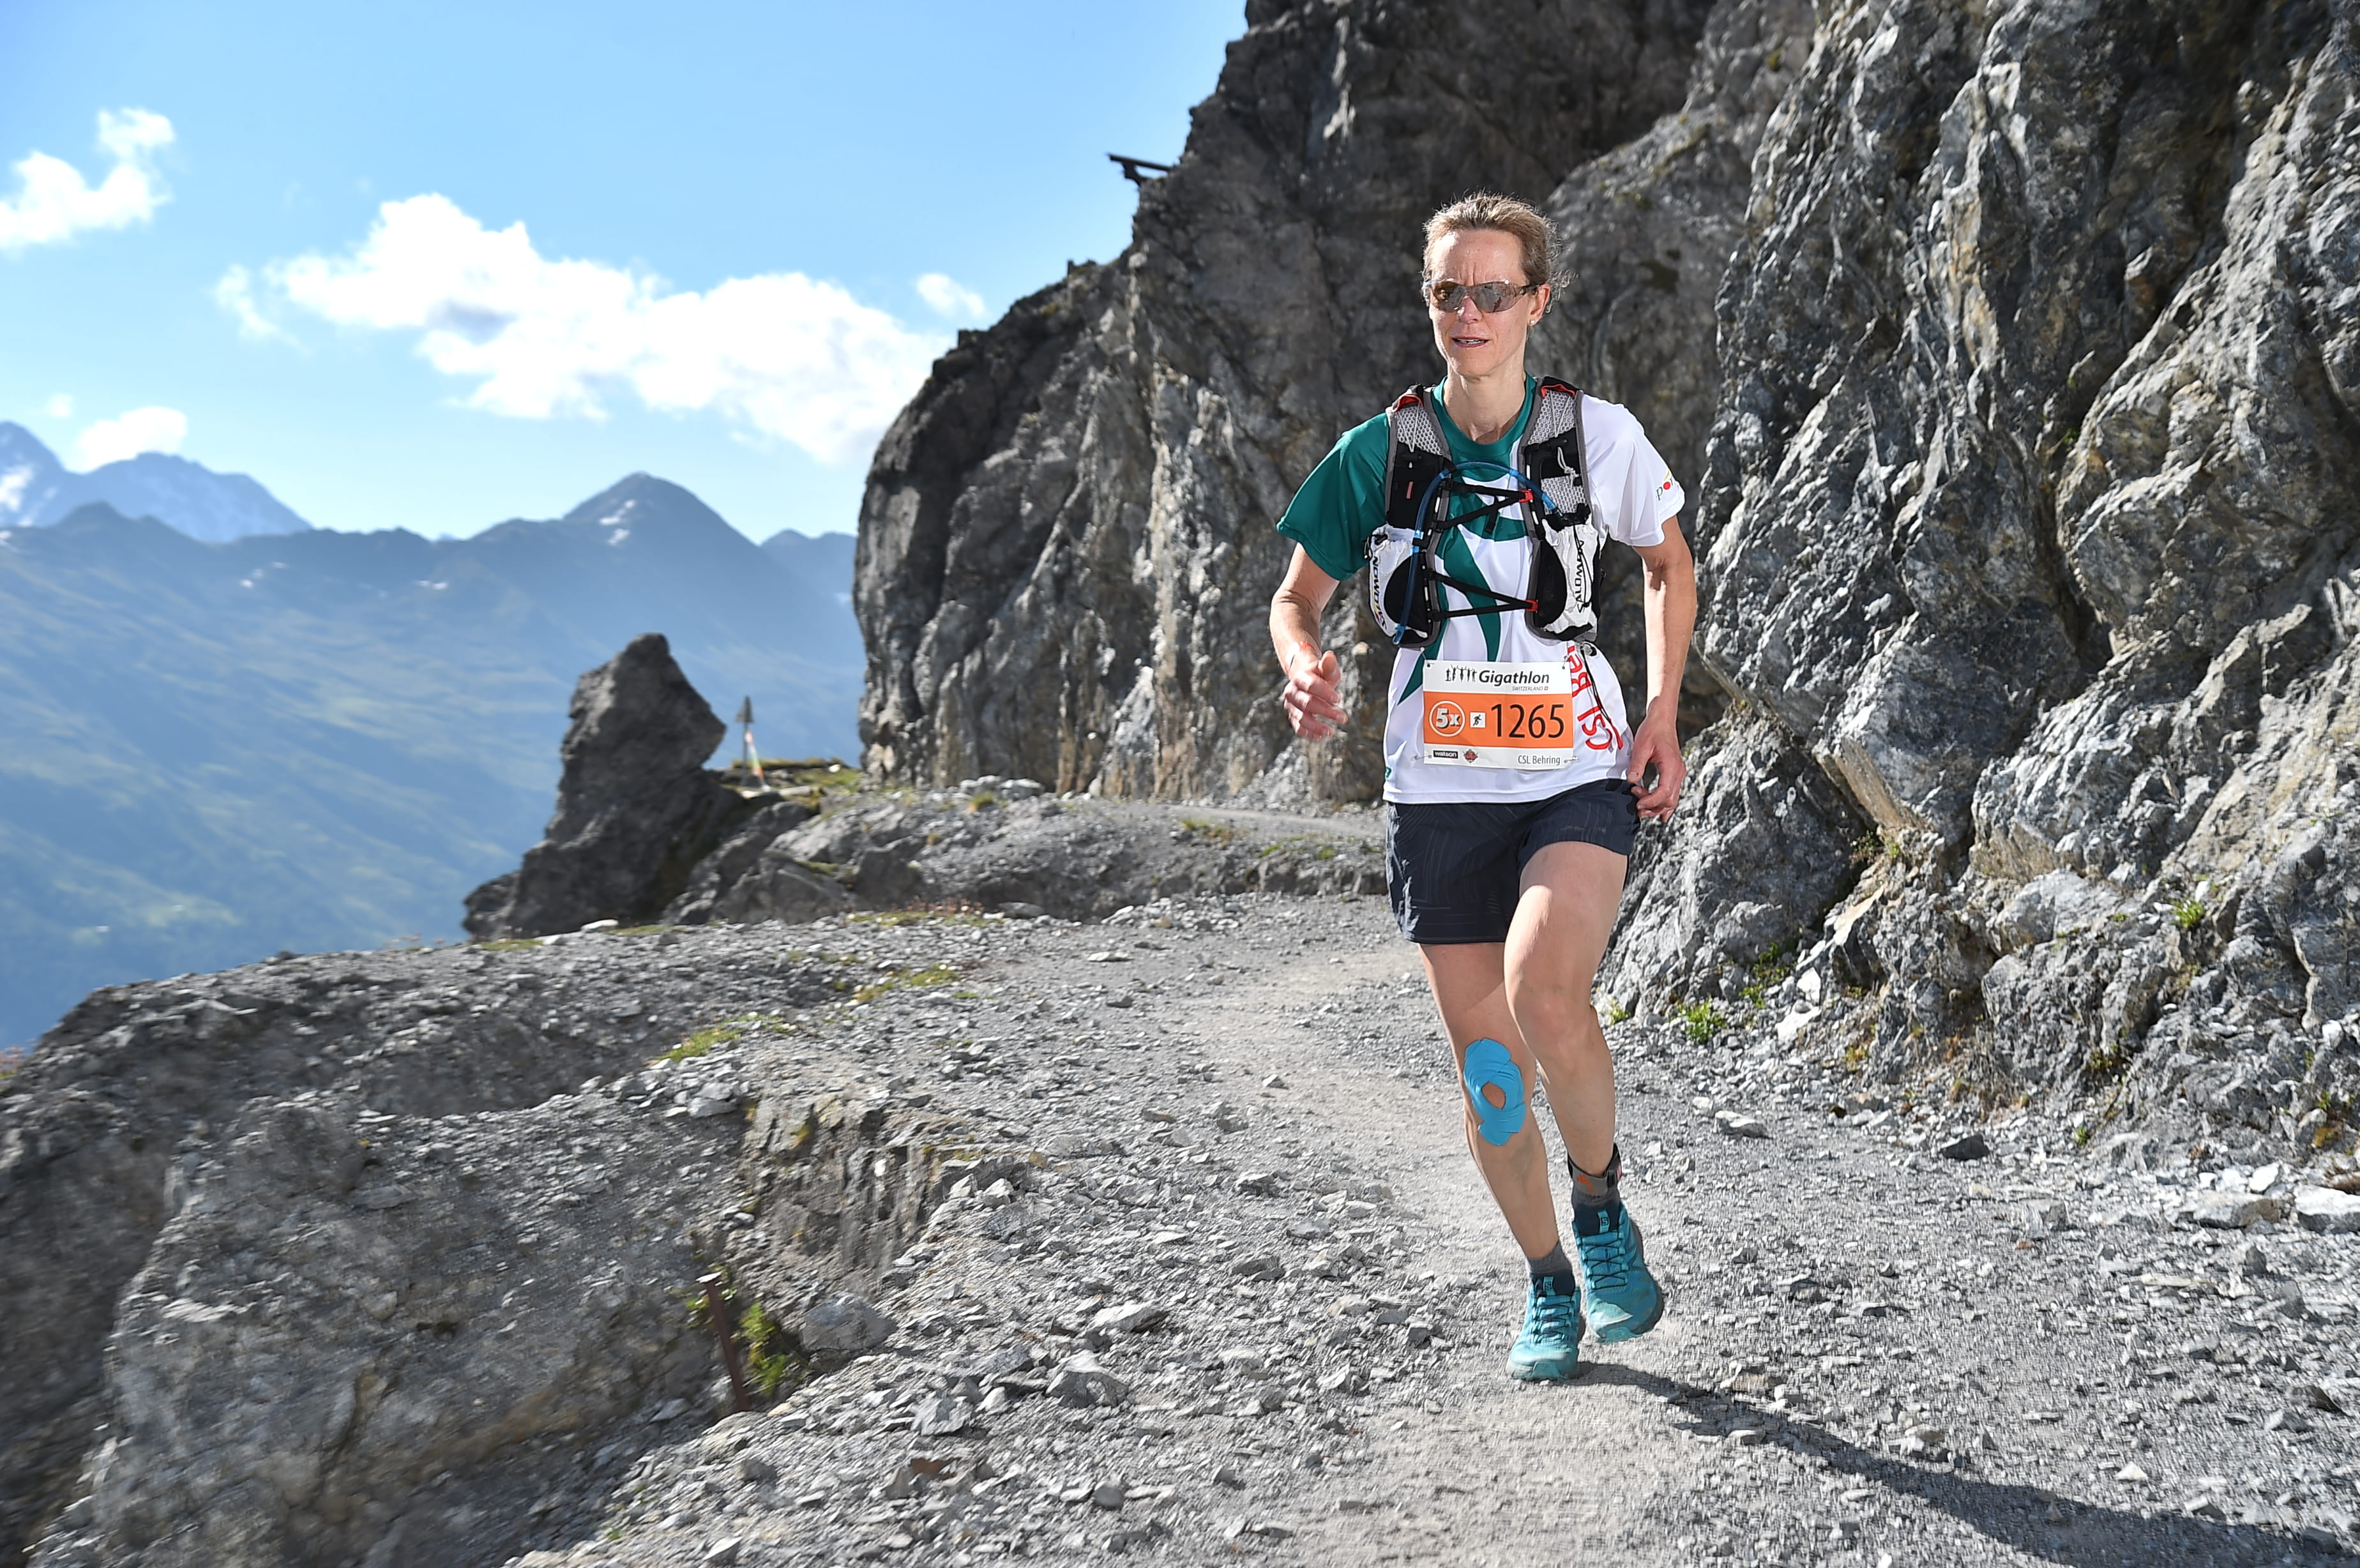 CSL Behring employee Karin Rezzonico running in the Swiss mountains at the Gigathlon 2018 event in Arosa. 